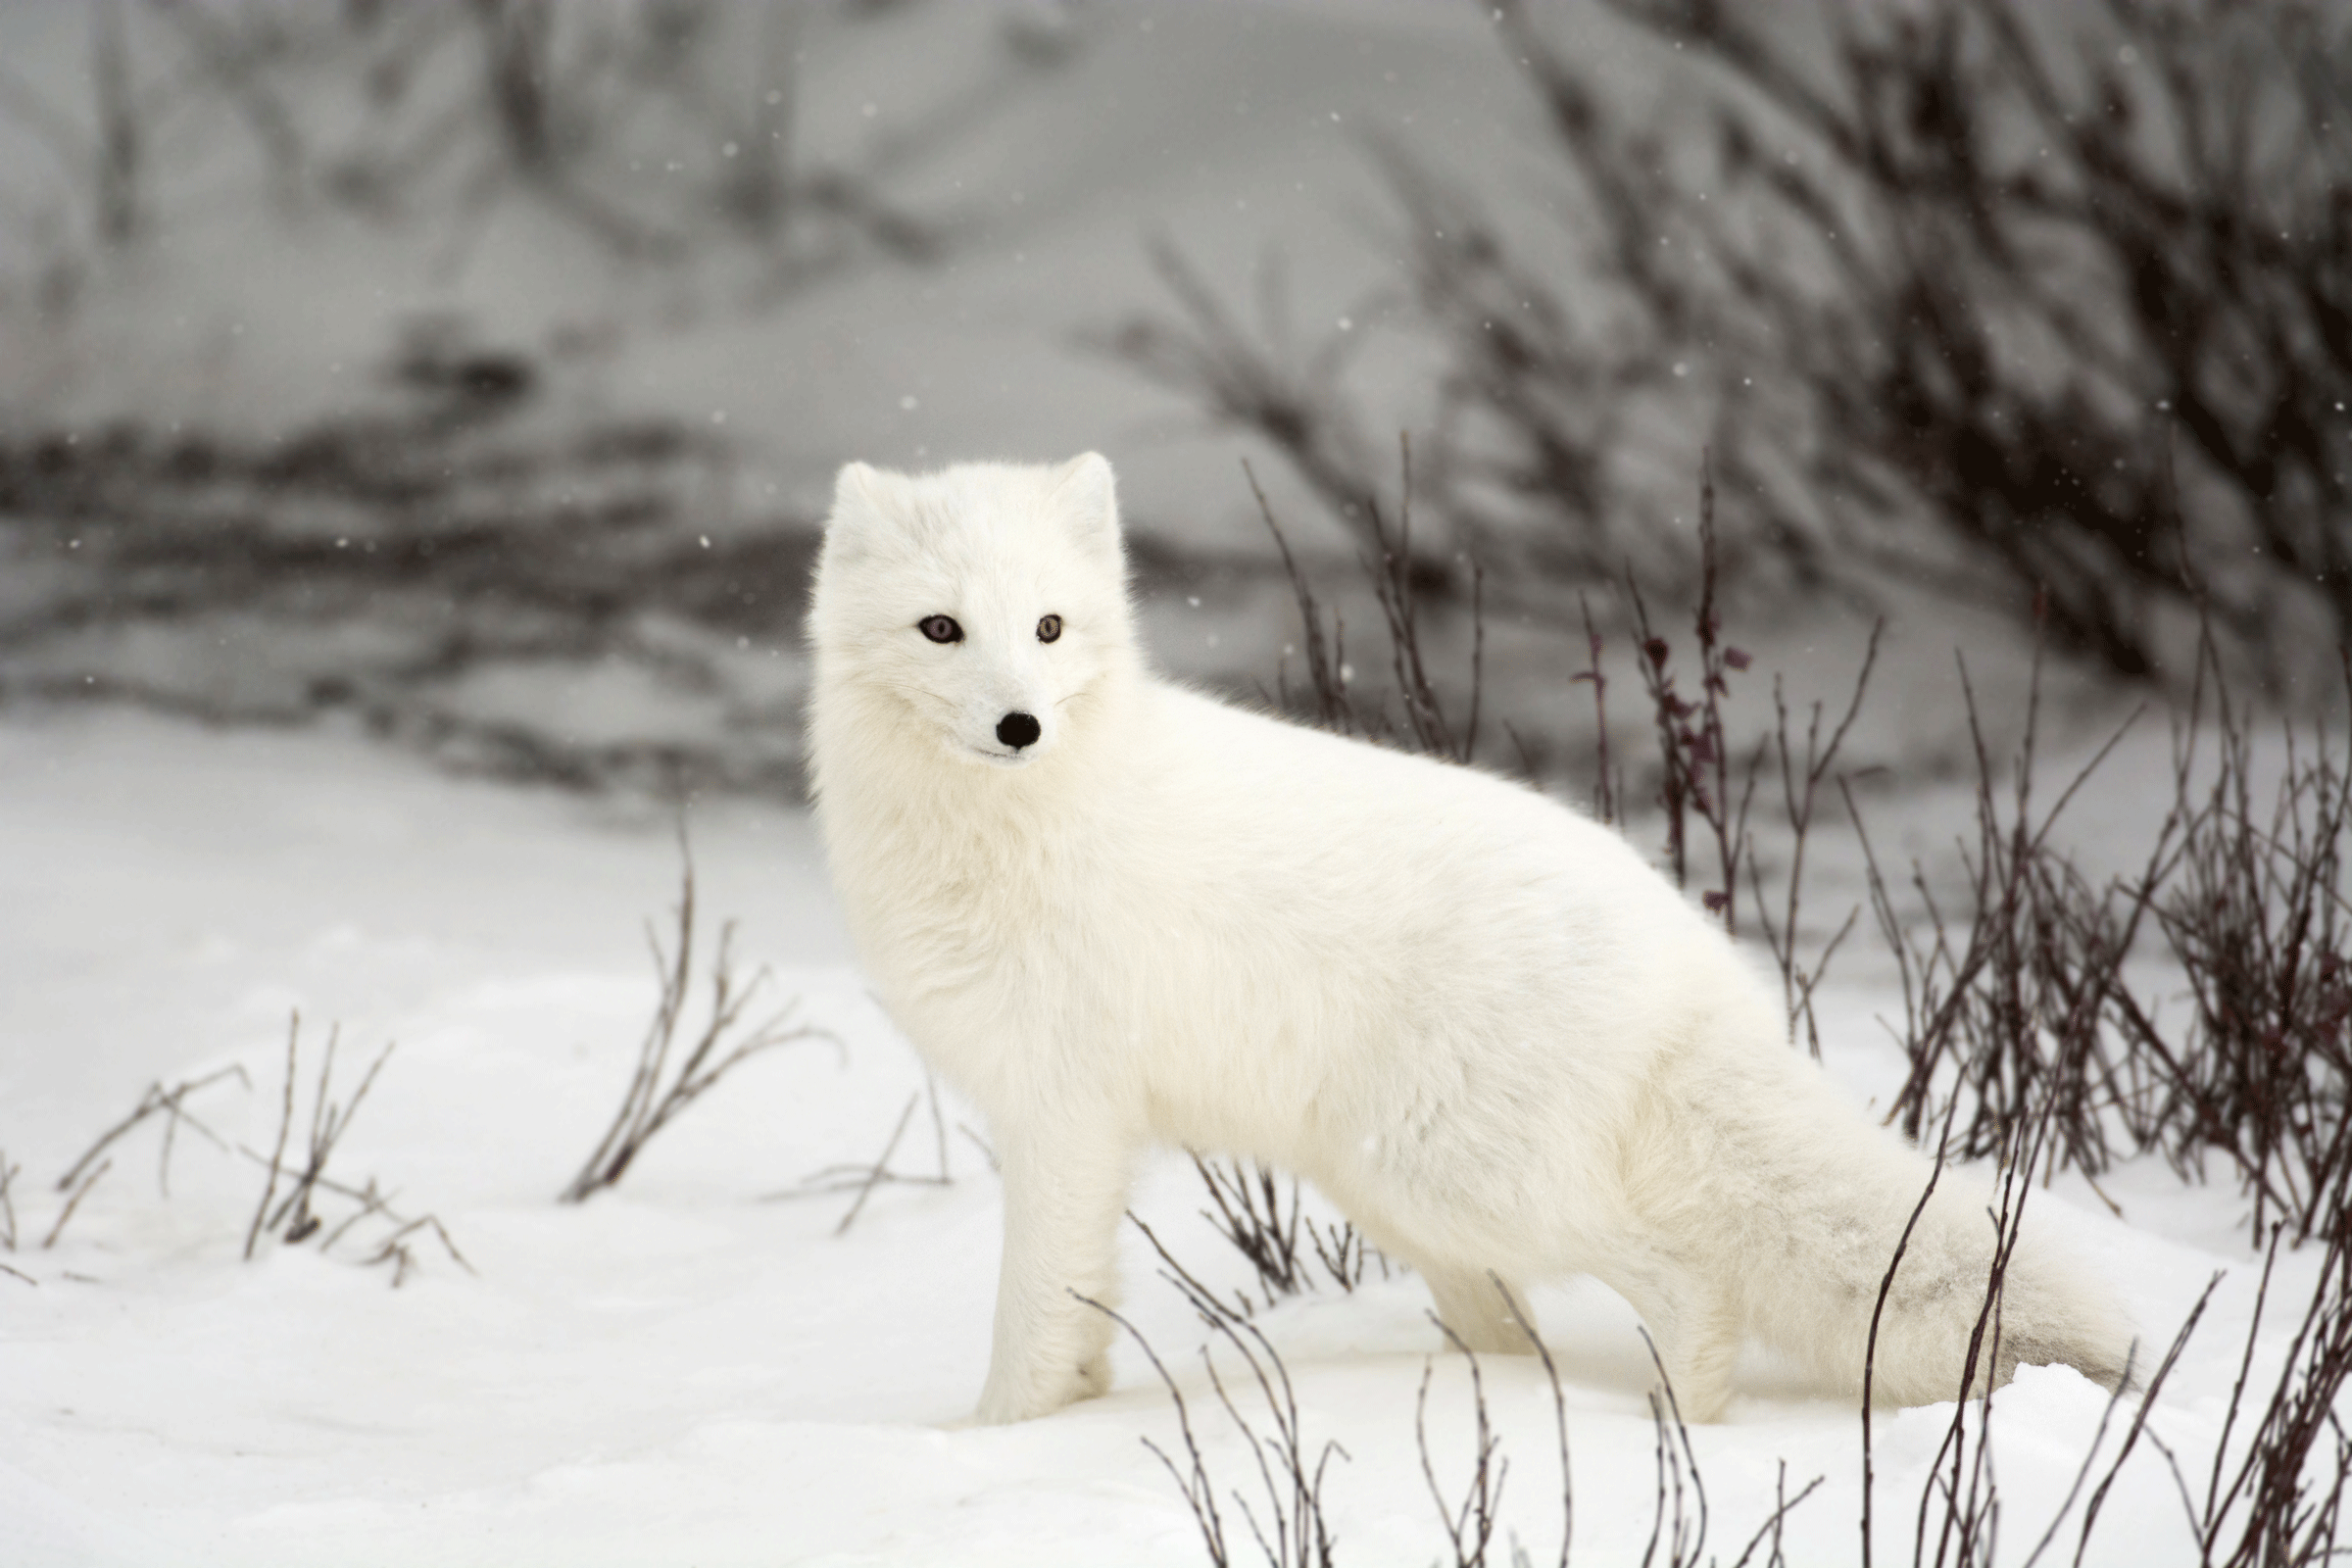 Living on Earth: Searching Out the Arctic Fox